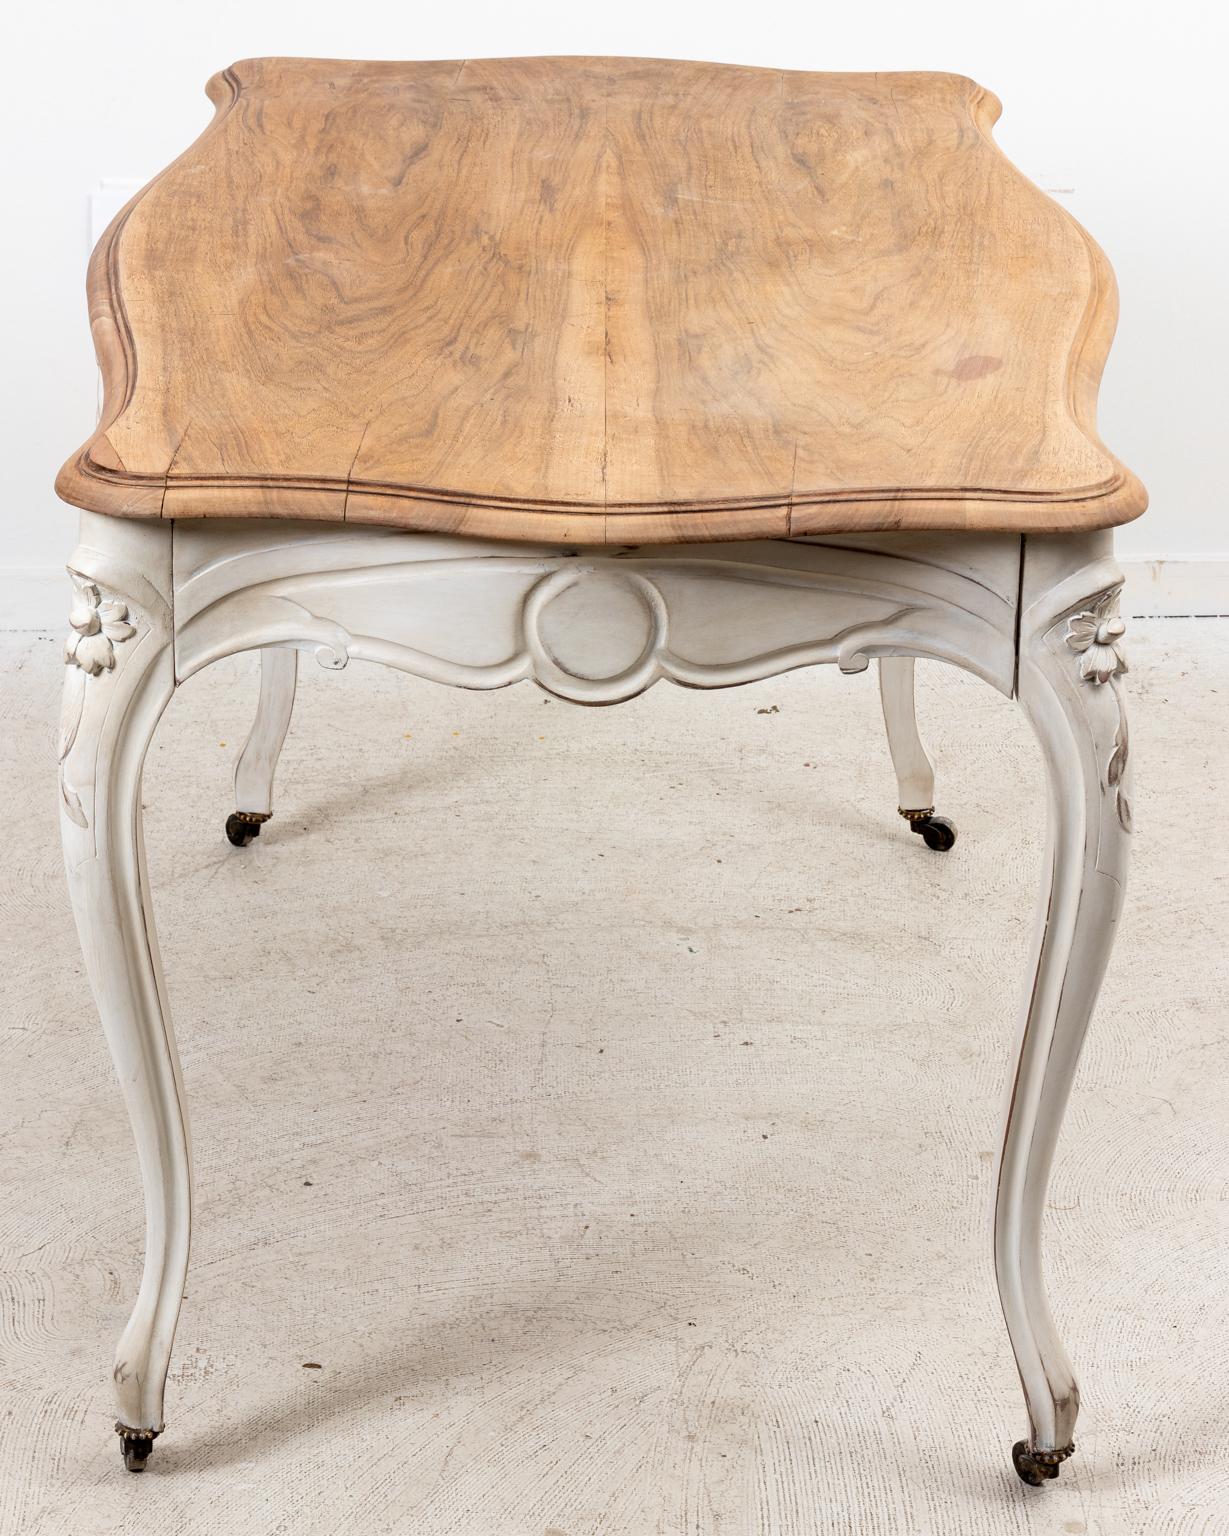 Circa 1940s Louis XV style white painted table with carved flowers on the curved apron and cabriole legs. The base is painted chalky white with a stripped Fruitwood top surface. One drawer opens from one side. The curved legs also end on castors.